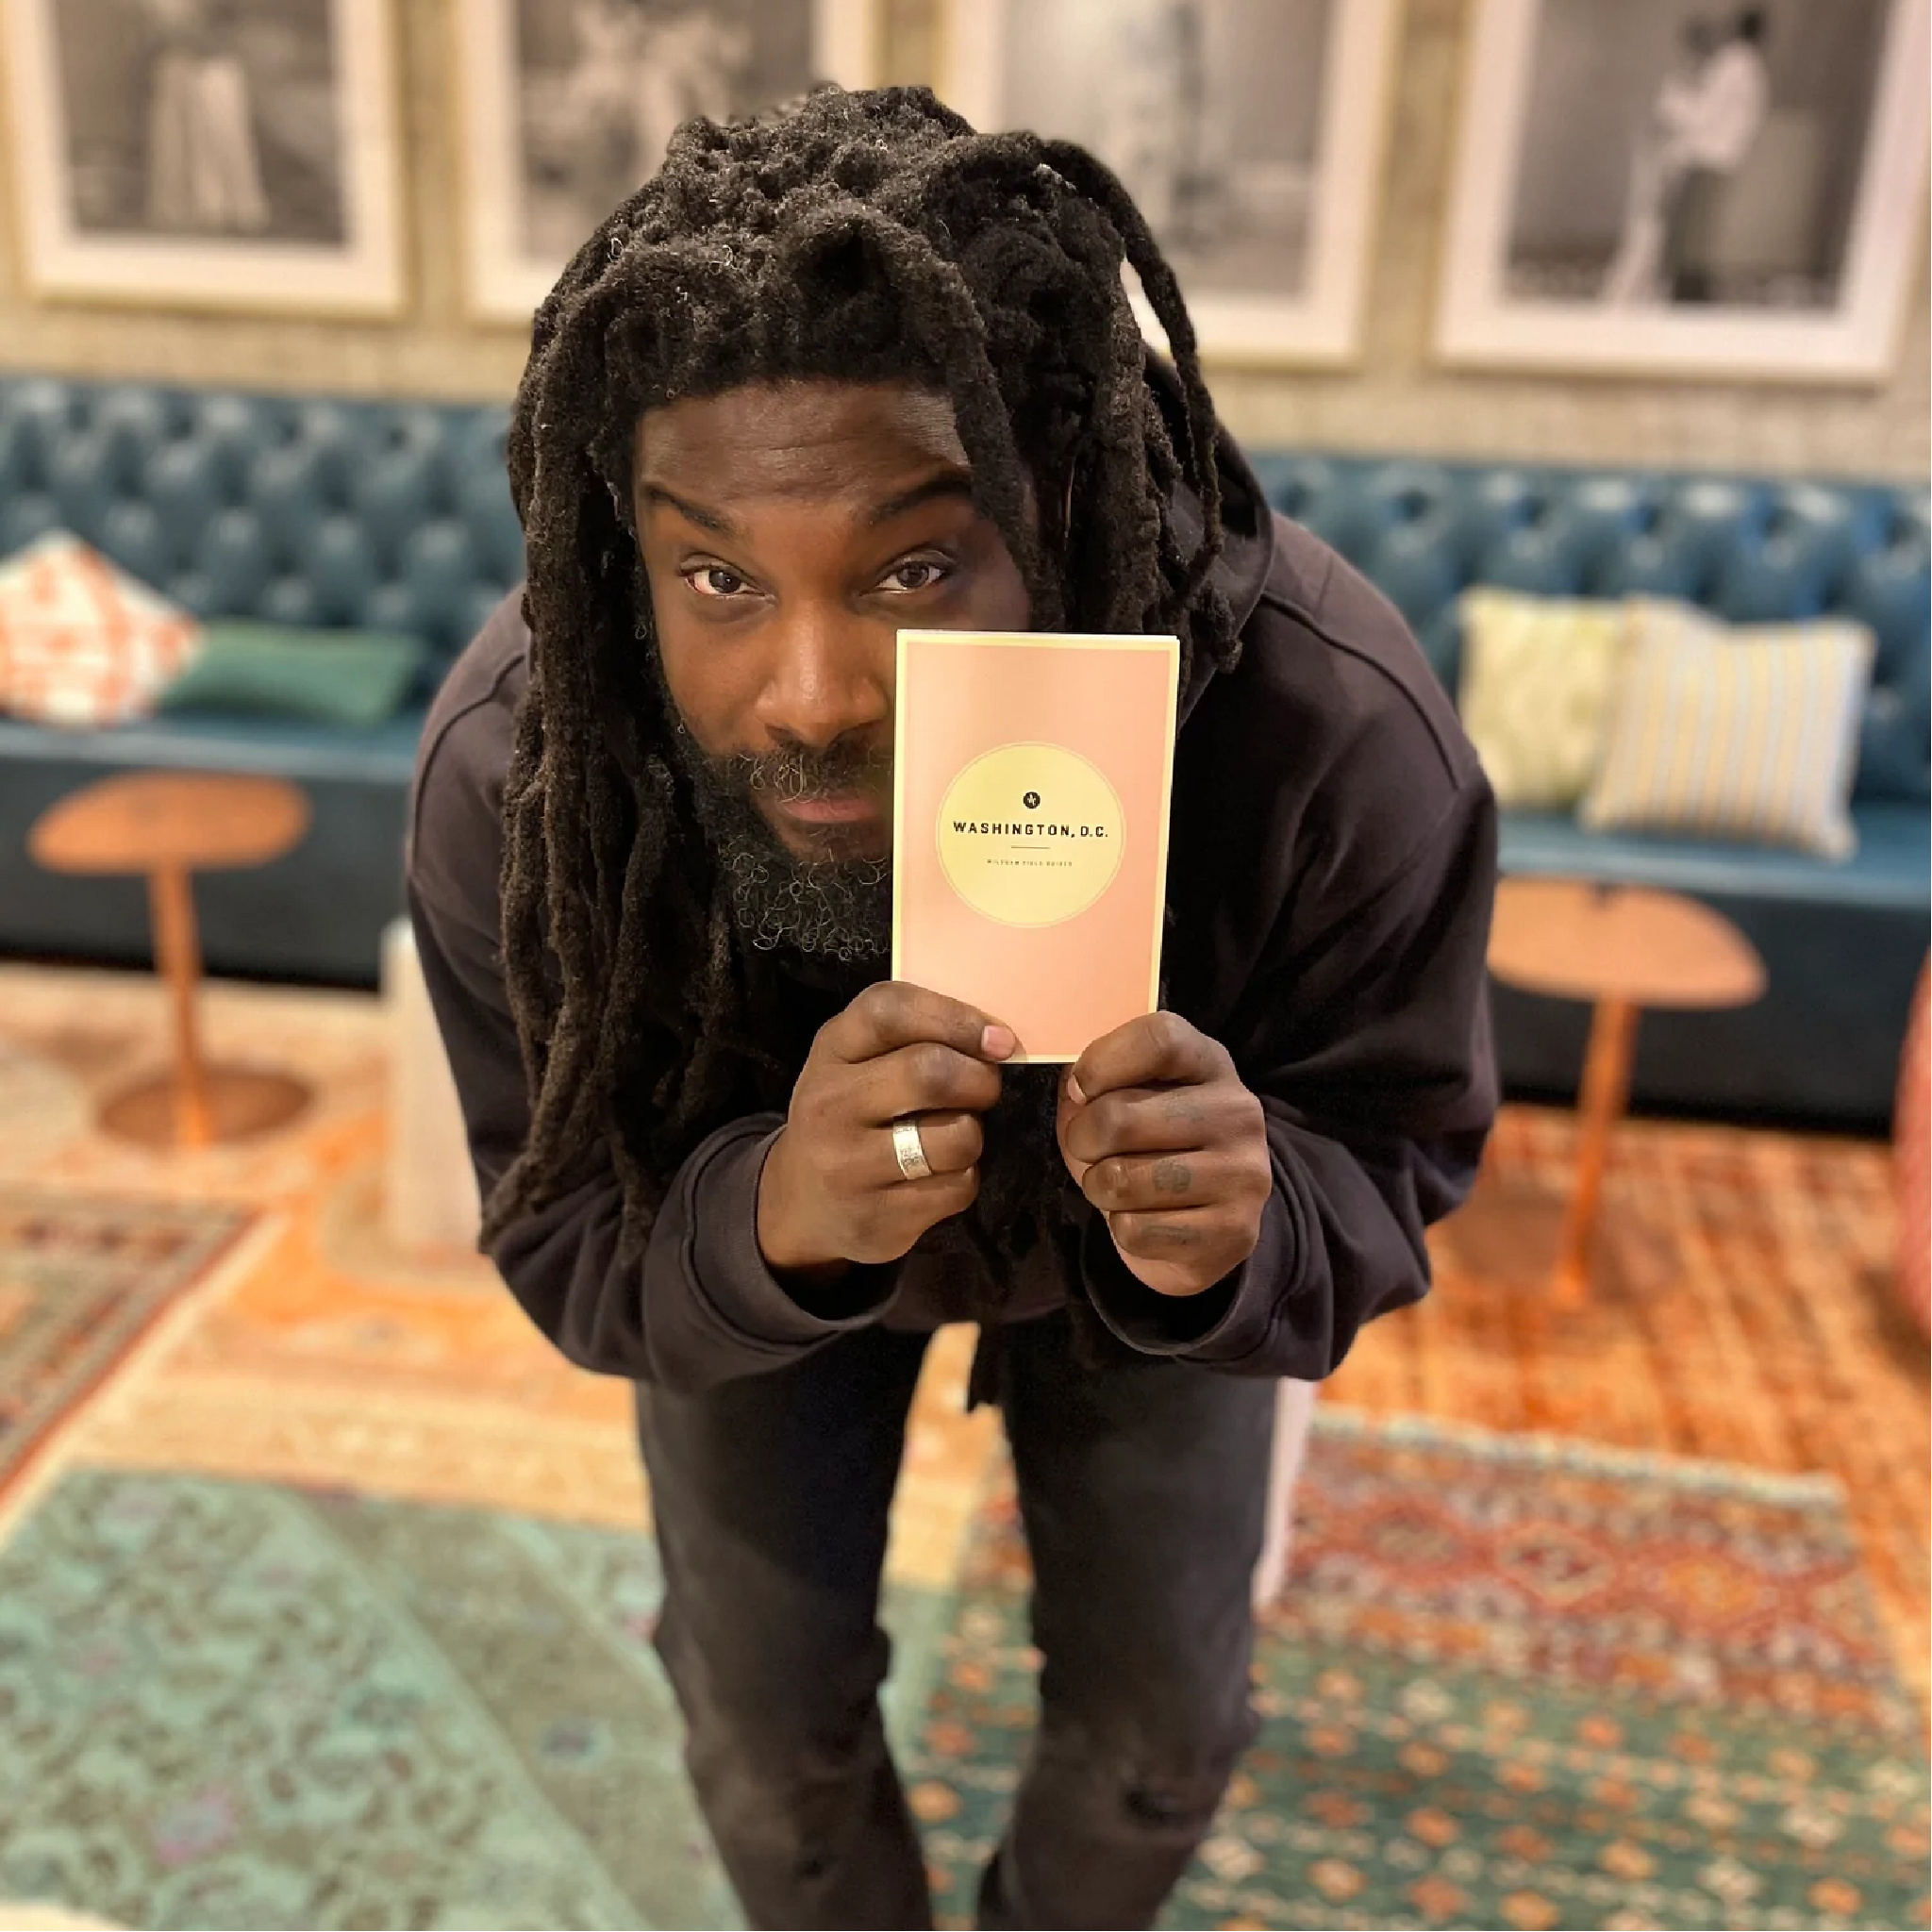 Author Jason Reynolds shows us the real D.C.